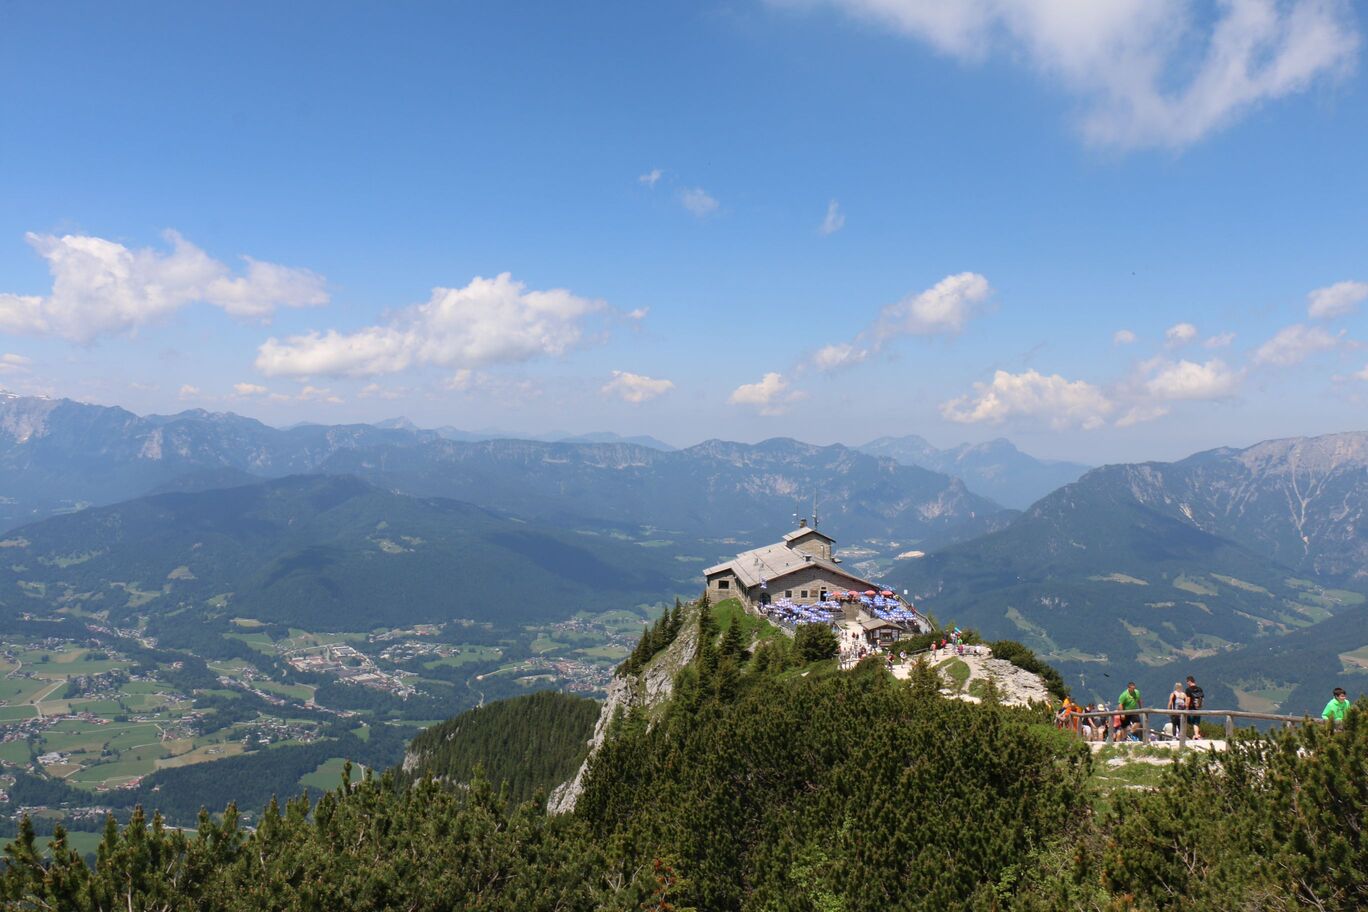 View from the top of the Eagle's Nest-